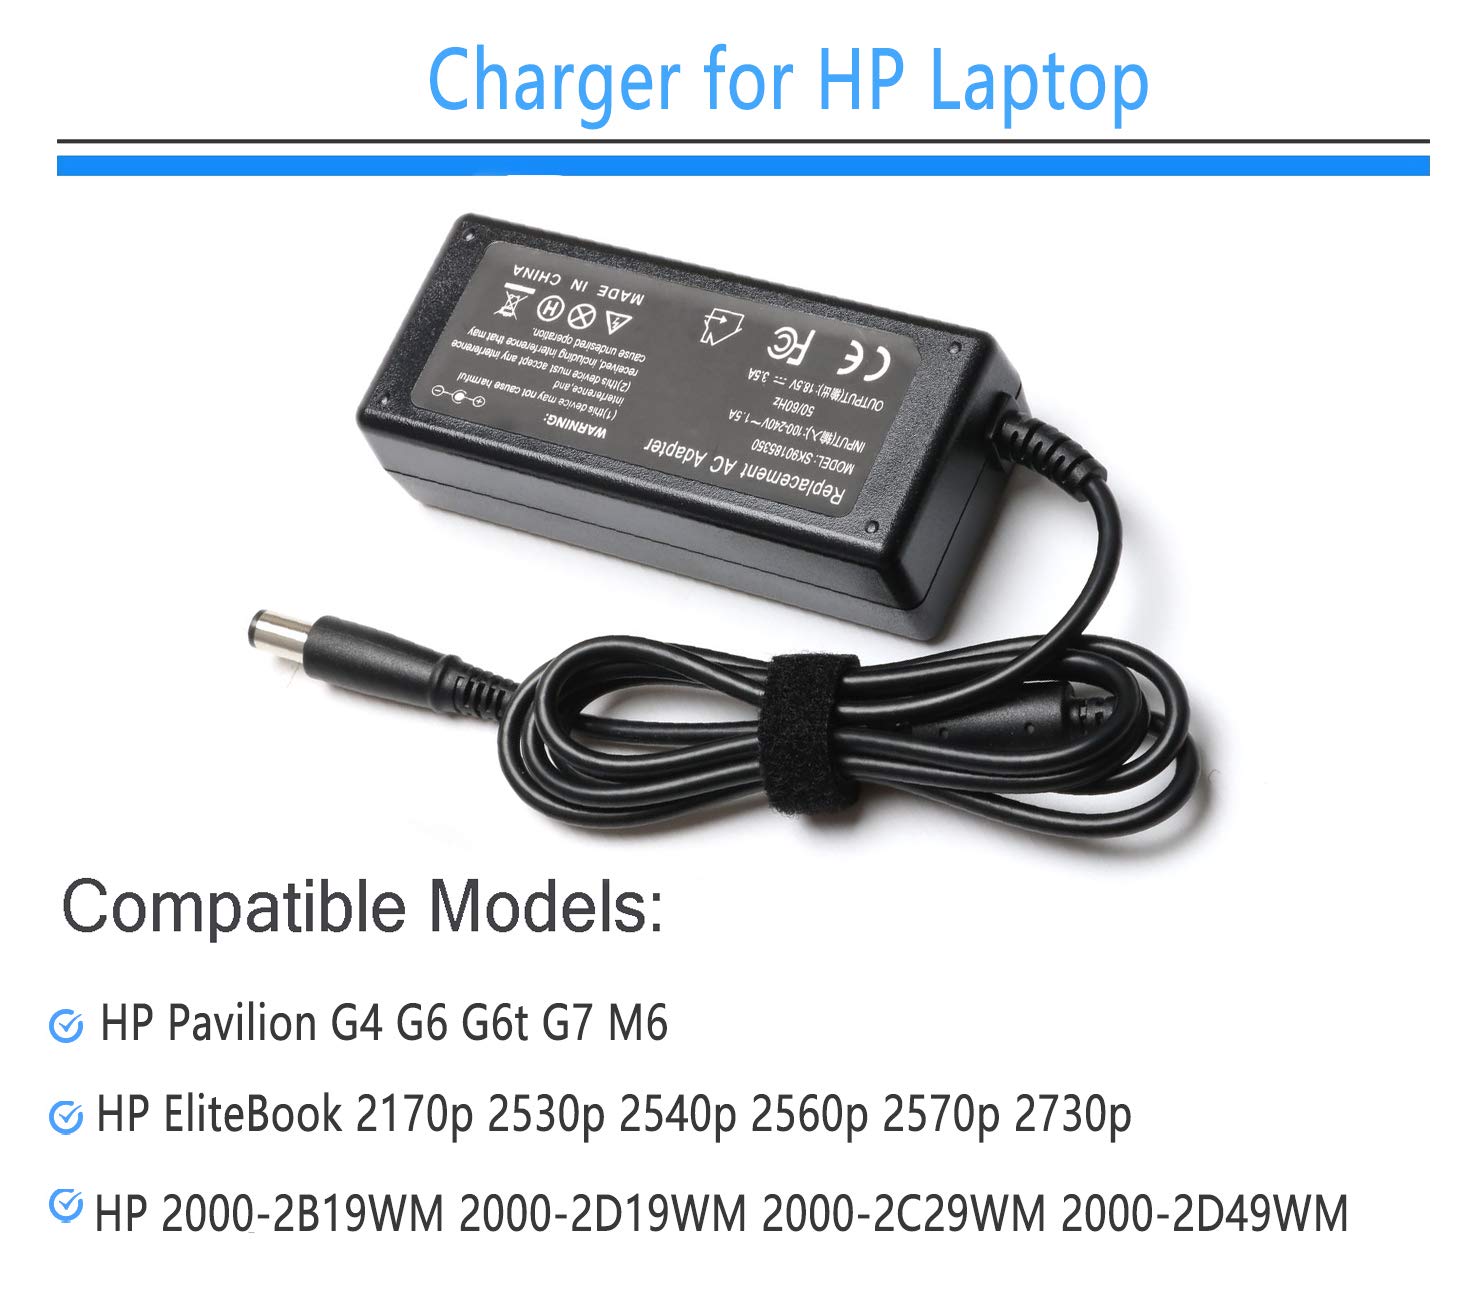 Mua 65W Laptop Charger AC/DC Adapter for HP Pavilion G4 G6 G7 M6 DM4 DV4  DV5 DV6 G60 G61 G72; EliteBook 2540p 2560p 2570p 2730p 2740p Power Supply  Cord trên Amazon Mỹ